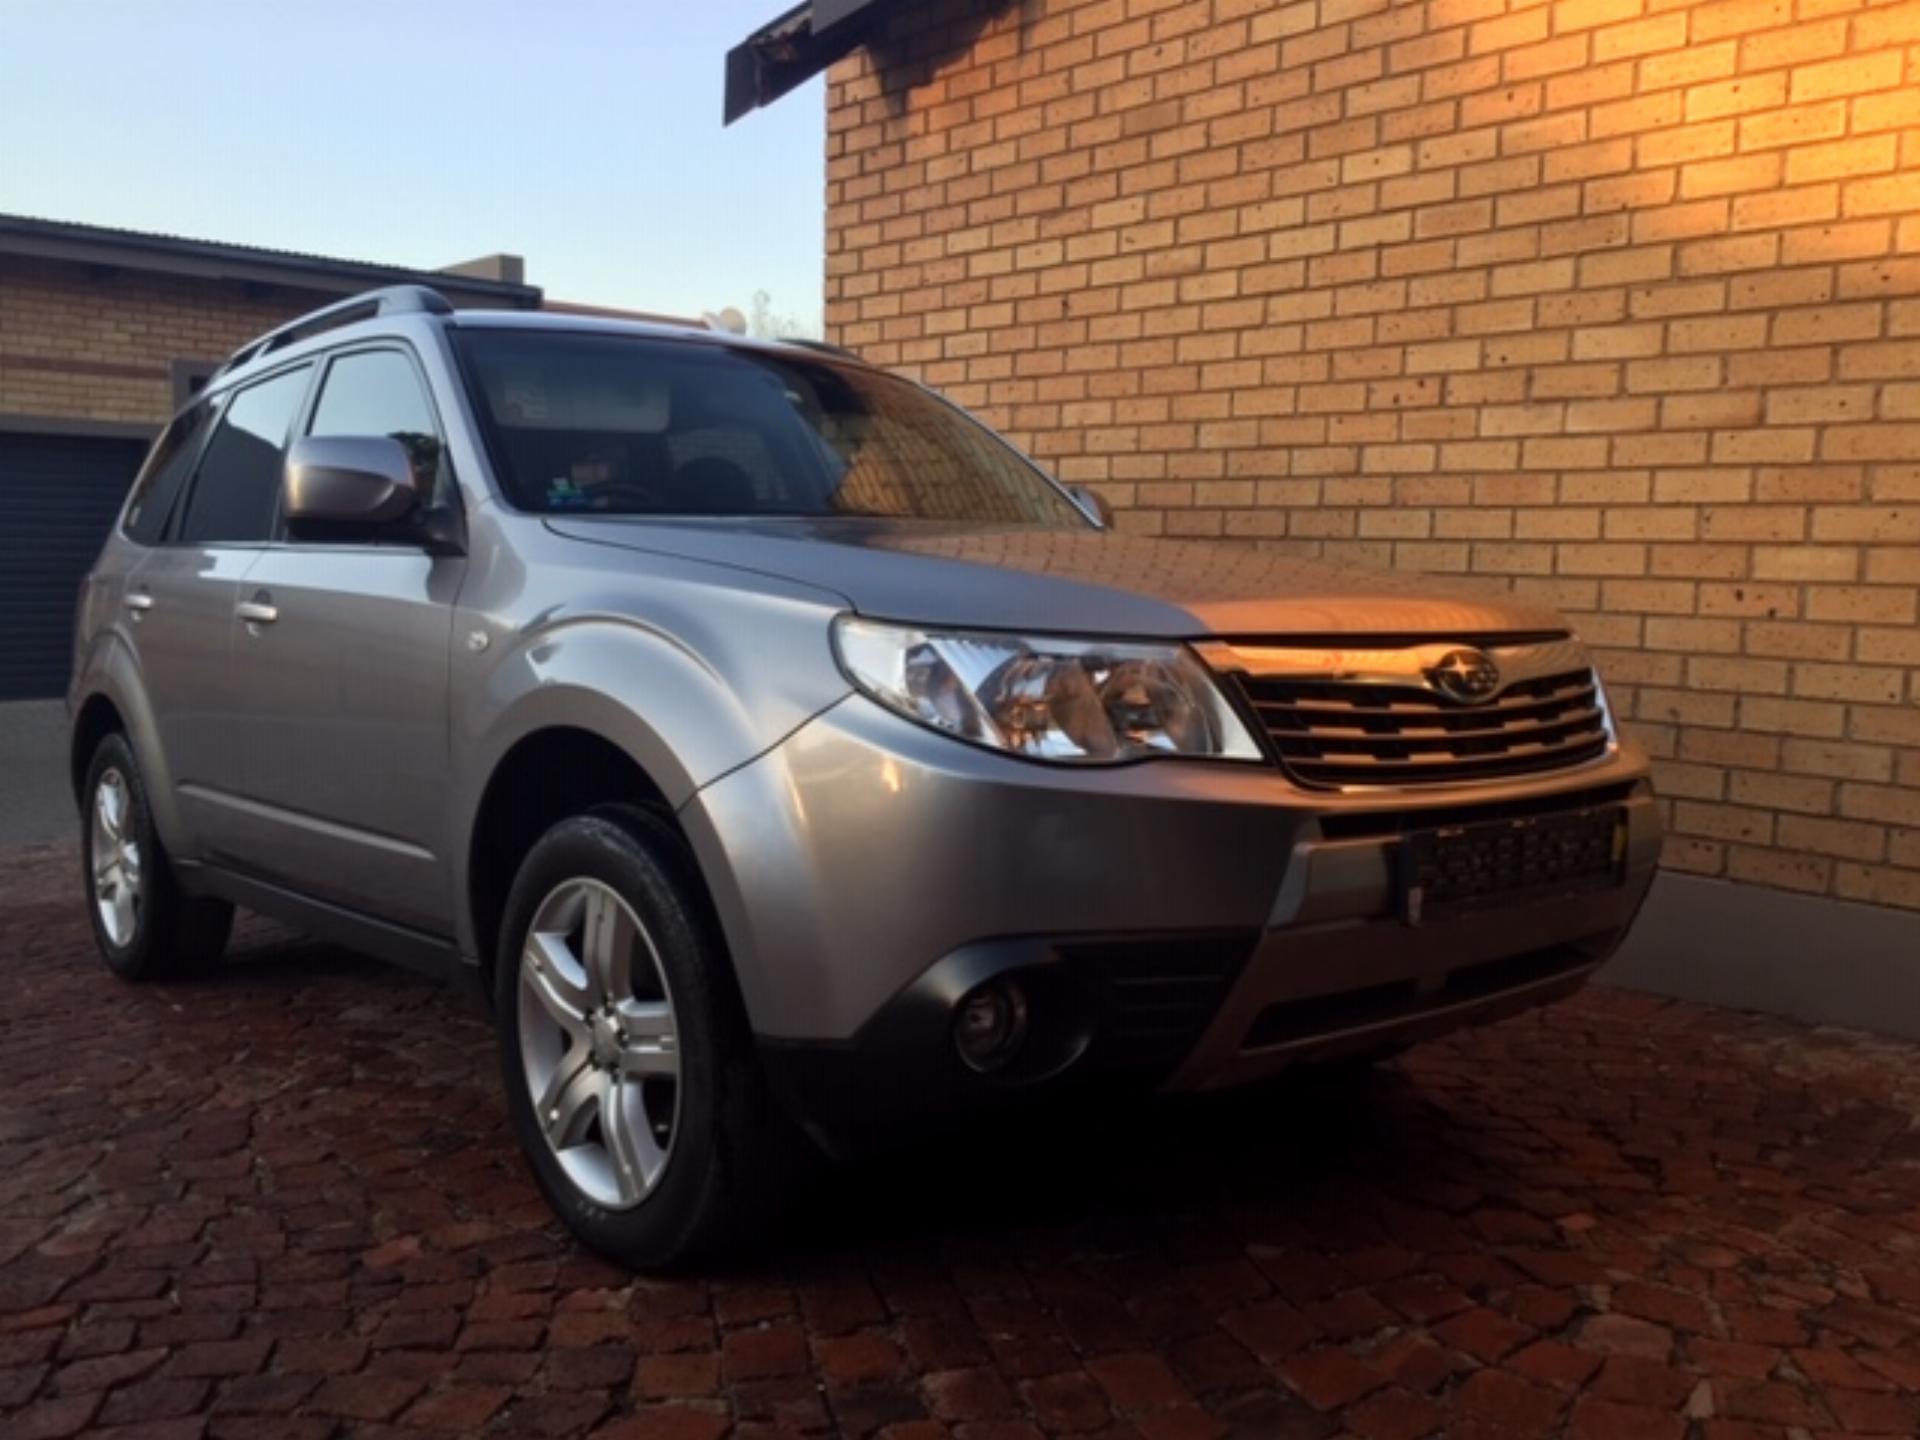 Used Subaru Forester XS 2009 on auction MC1907290024